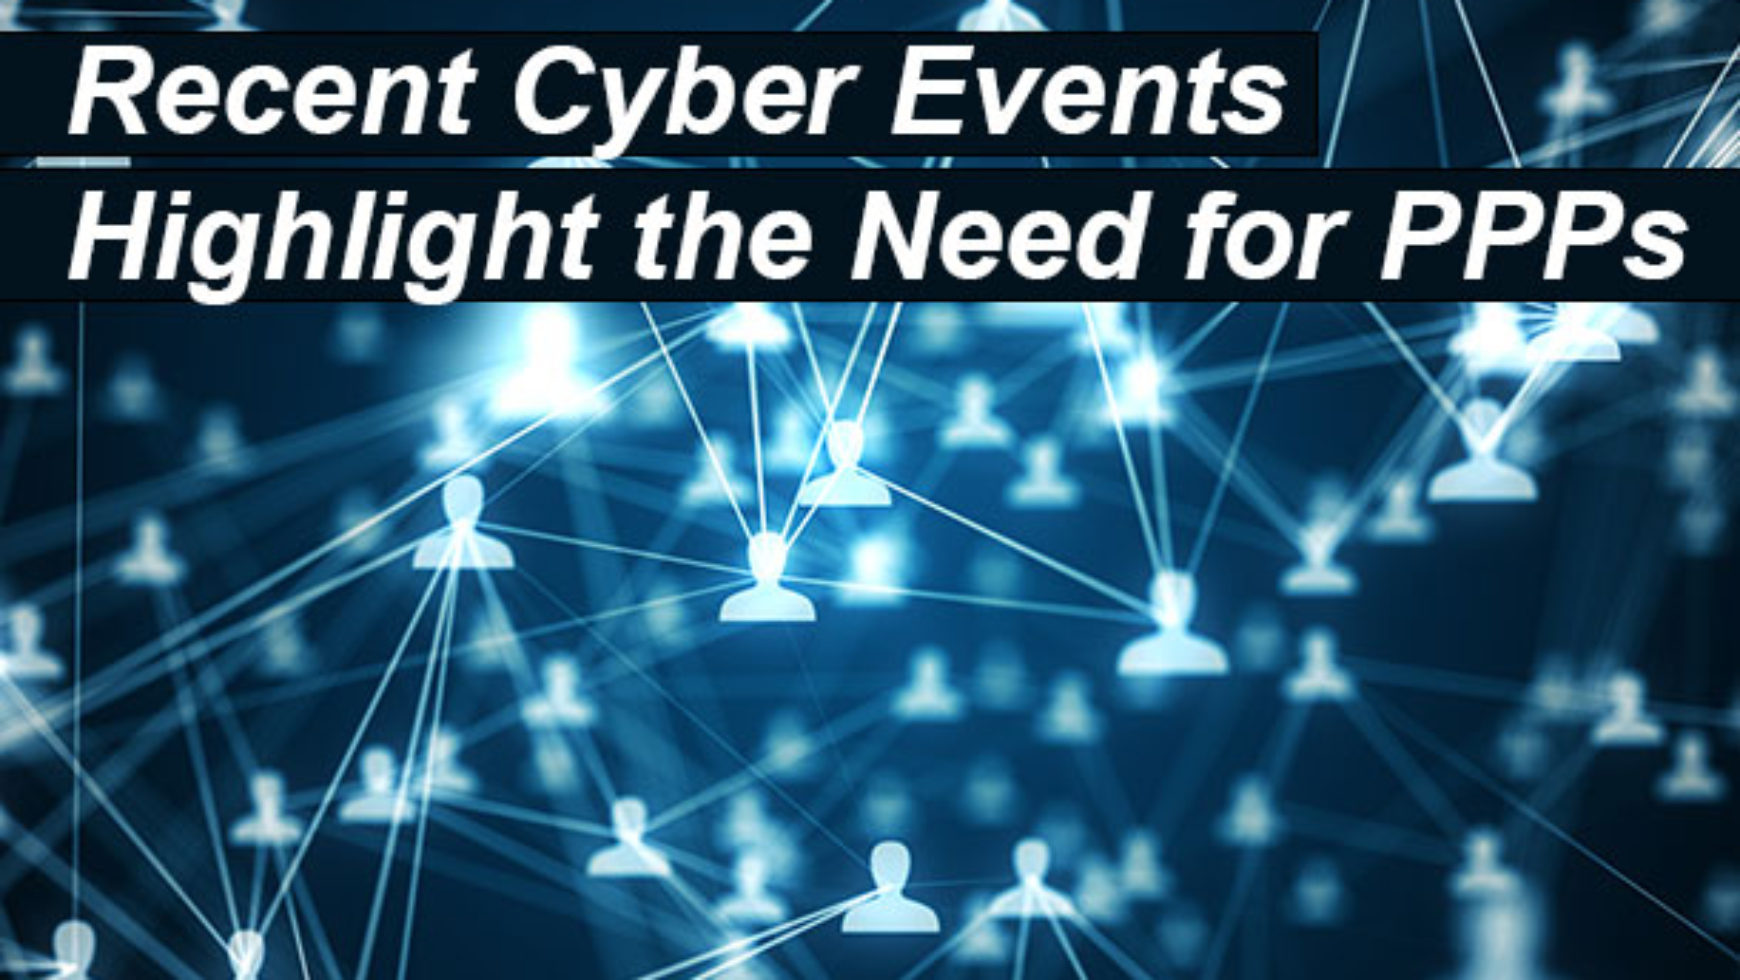 Recent Cyber Events Highlight the Need for Public-Private Partnership